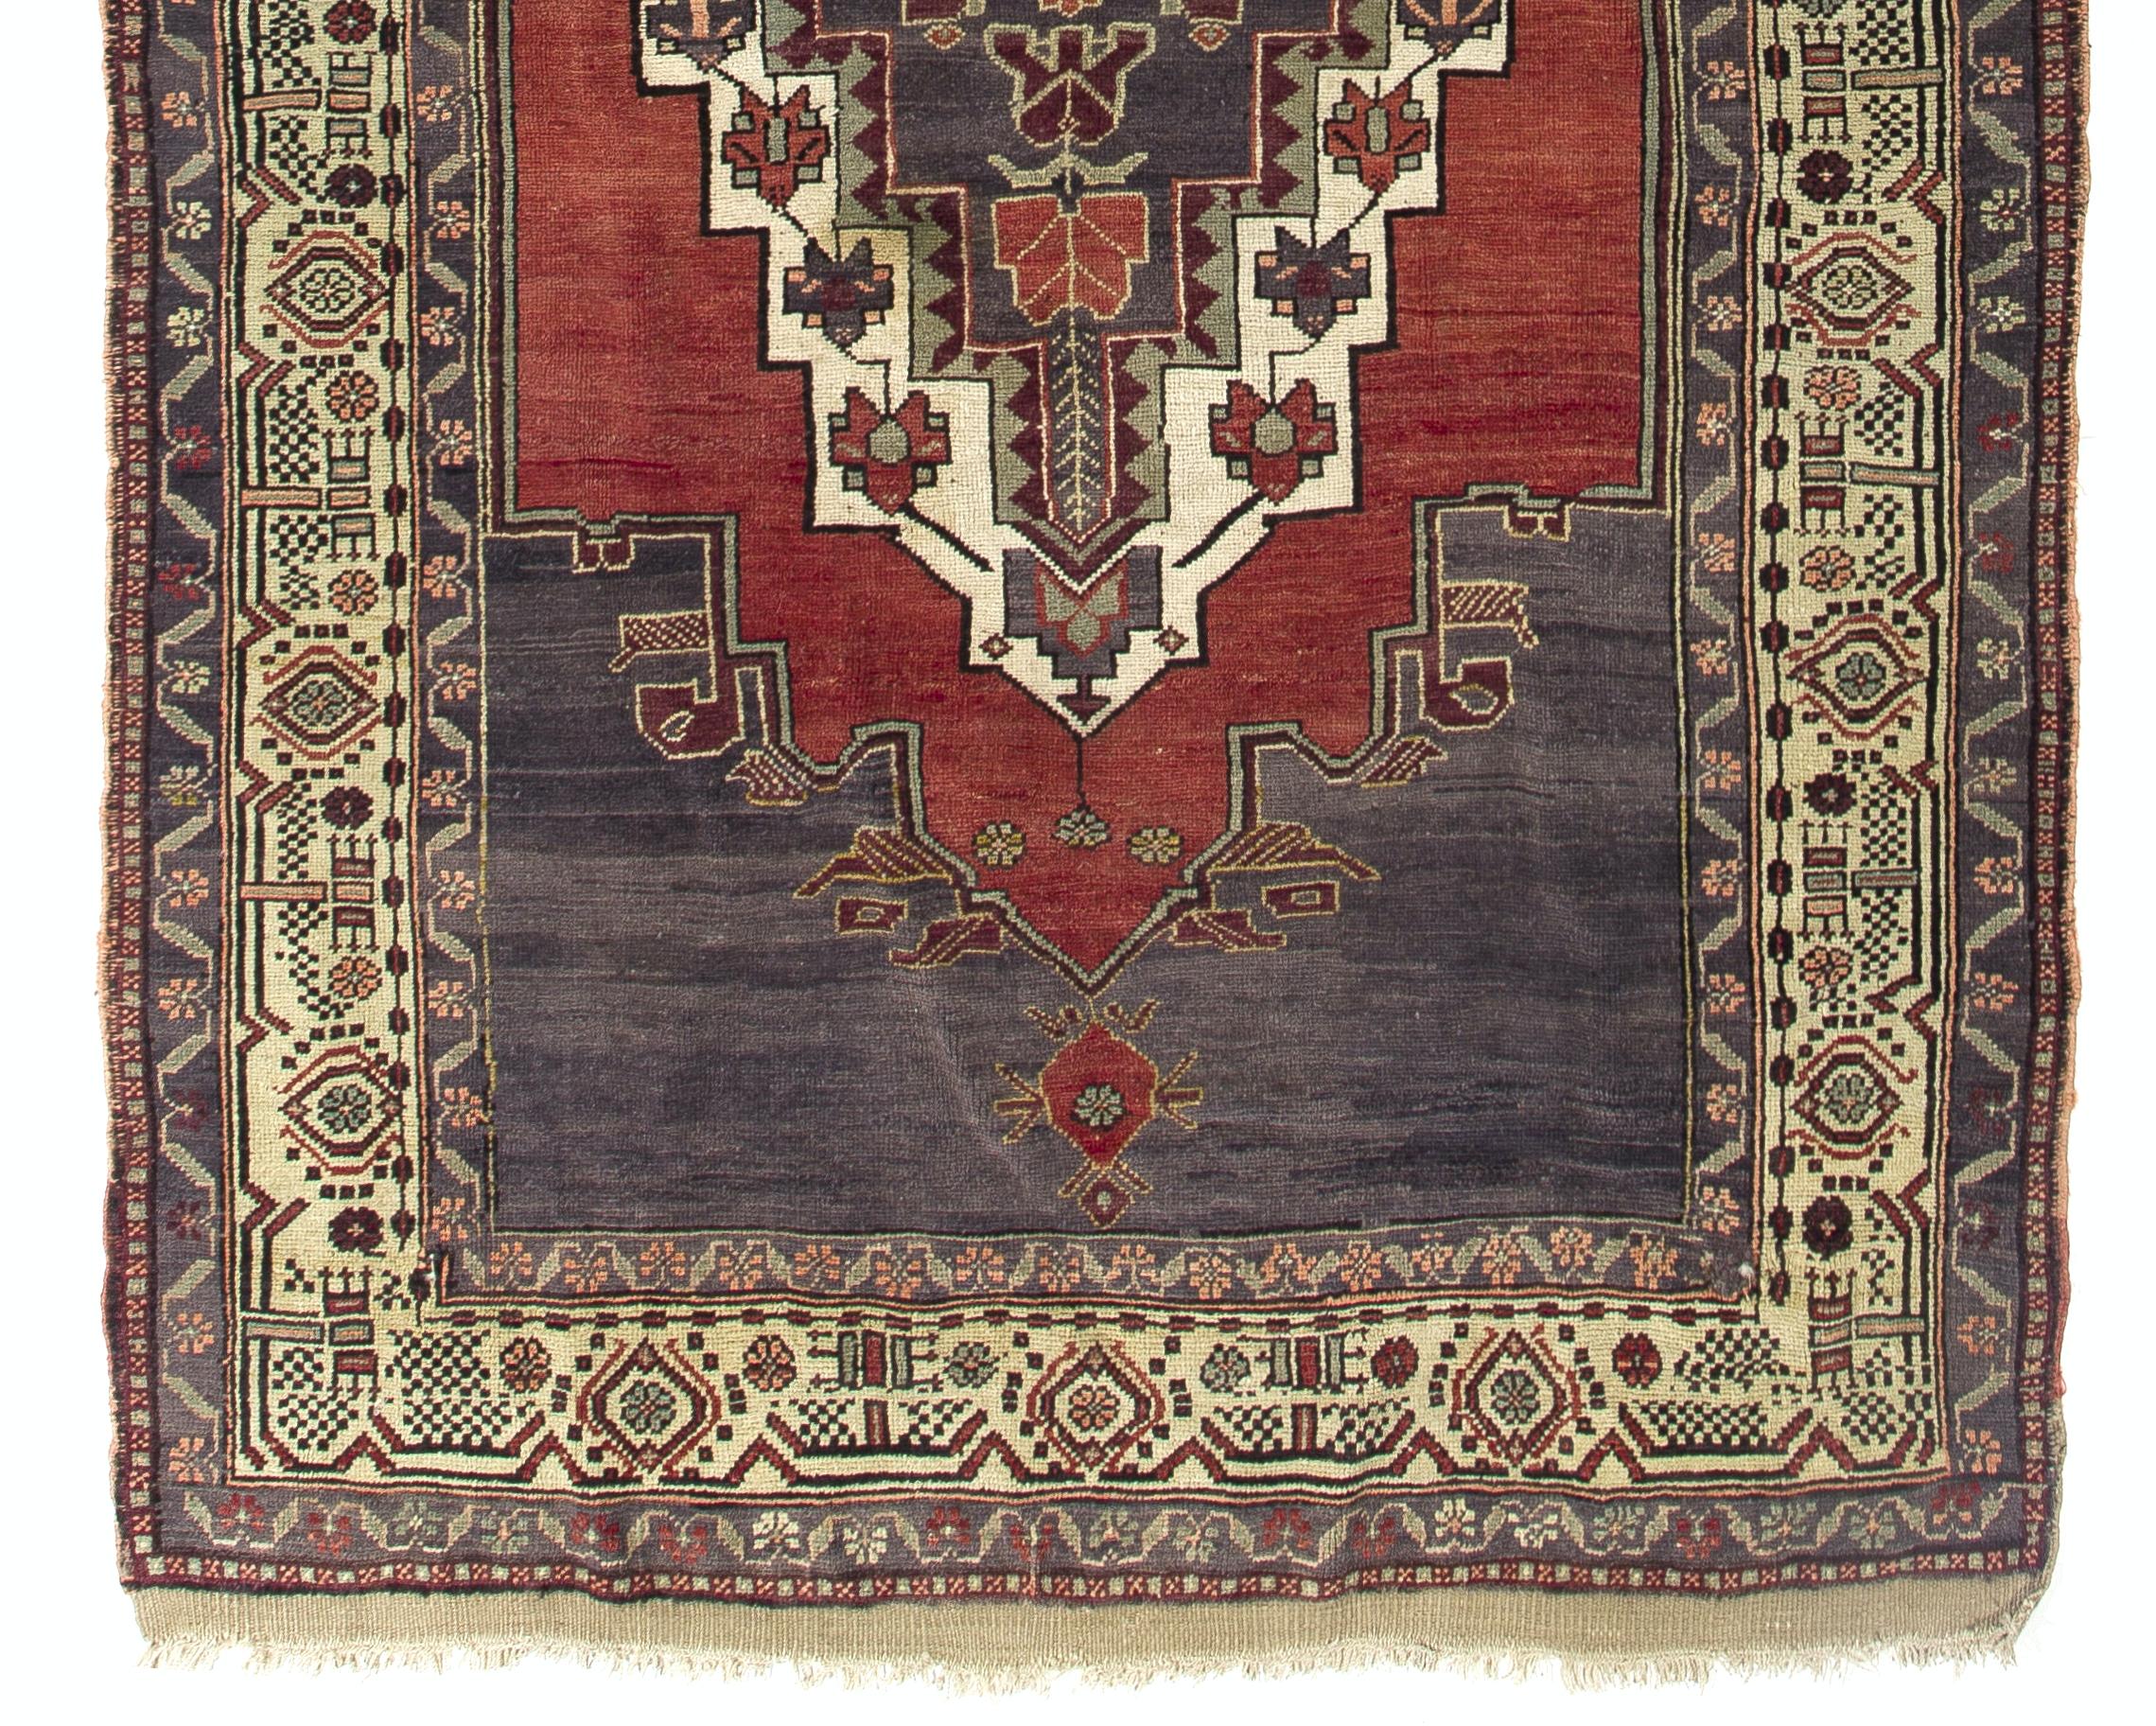 20th Century 5.3x12.6 Ft Handmade Vintage Turkish Tribal Rug. One-of-a-Kind Oriental Carpet For Sale